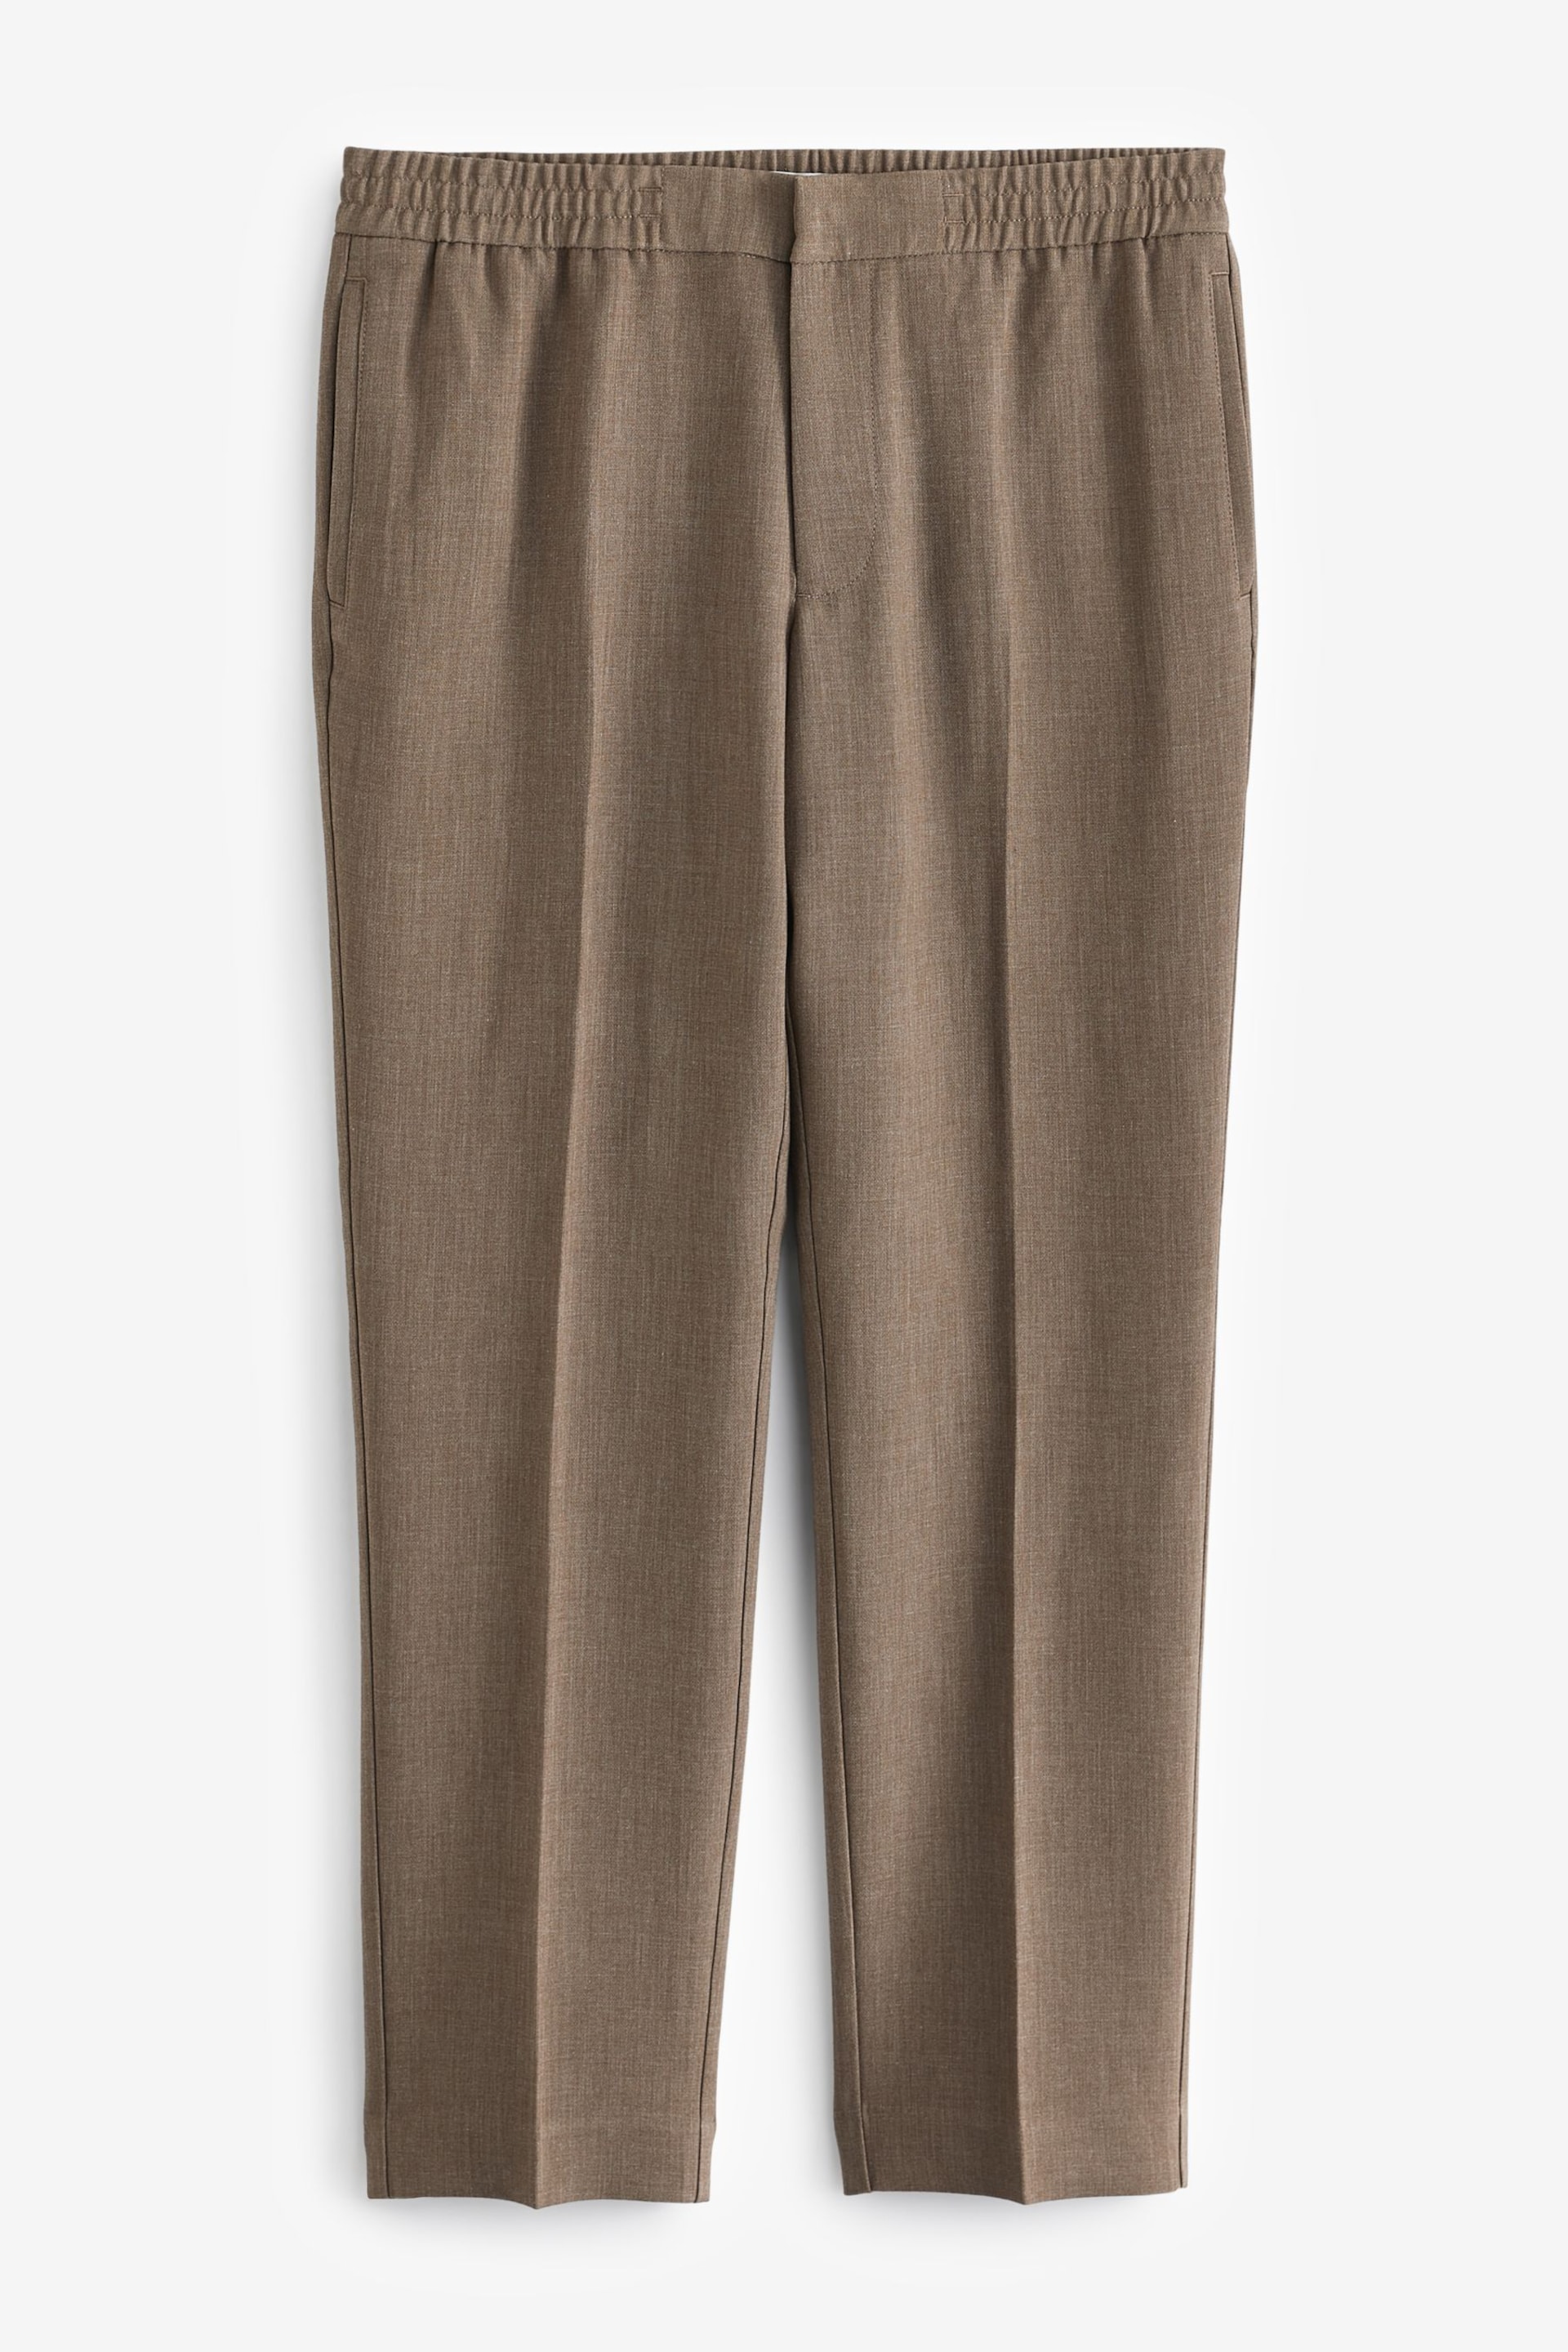 River Island Brown Elastic Ponte Trousers - Image 5 of 5